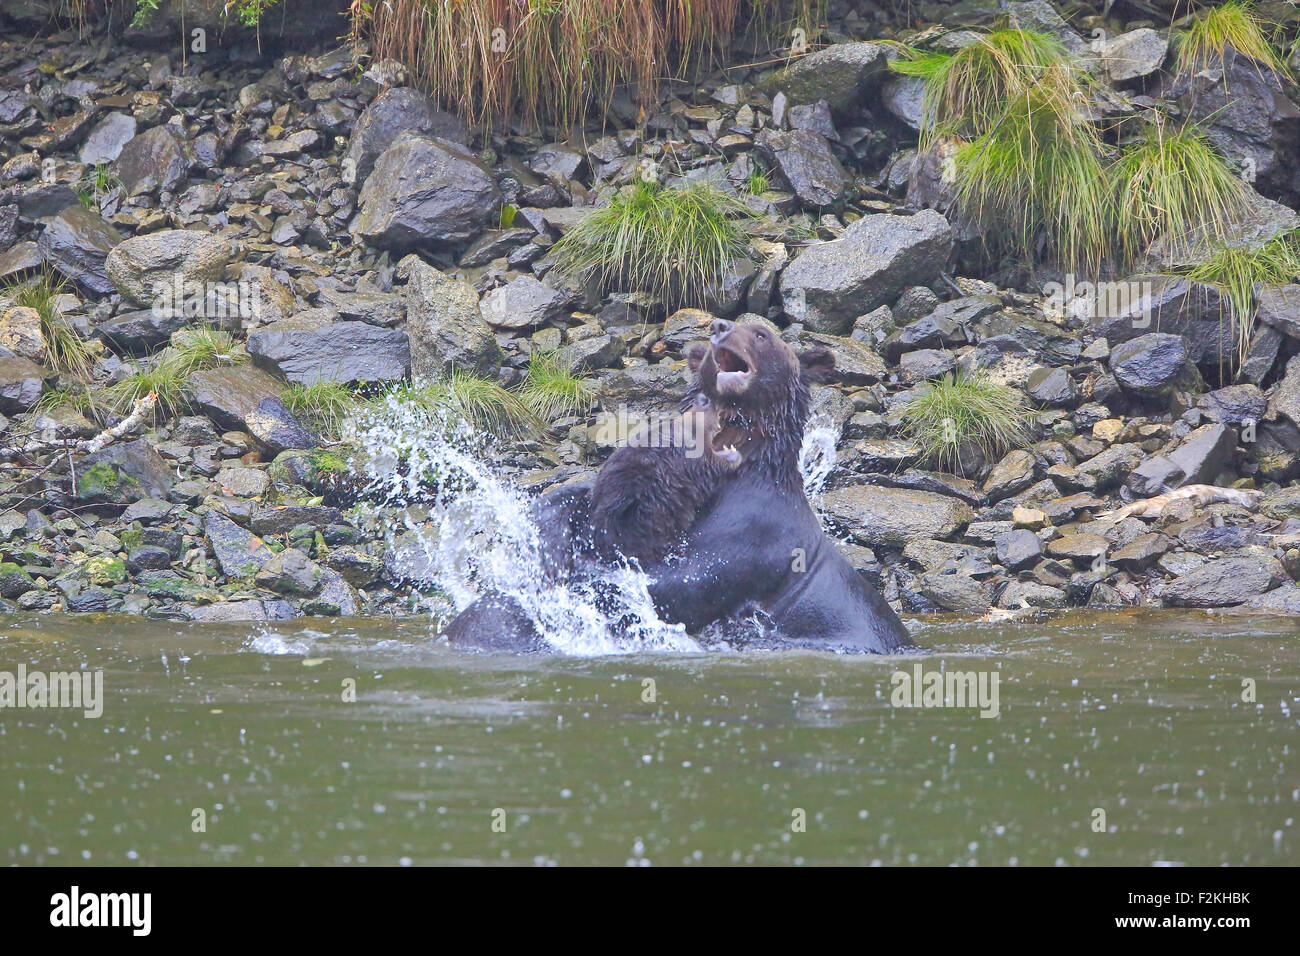 Two immature grizzly bears sparring in a river during a rain storm in British Columbia Stock Photo